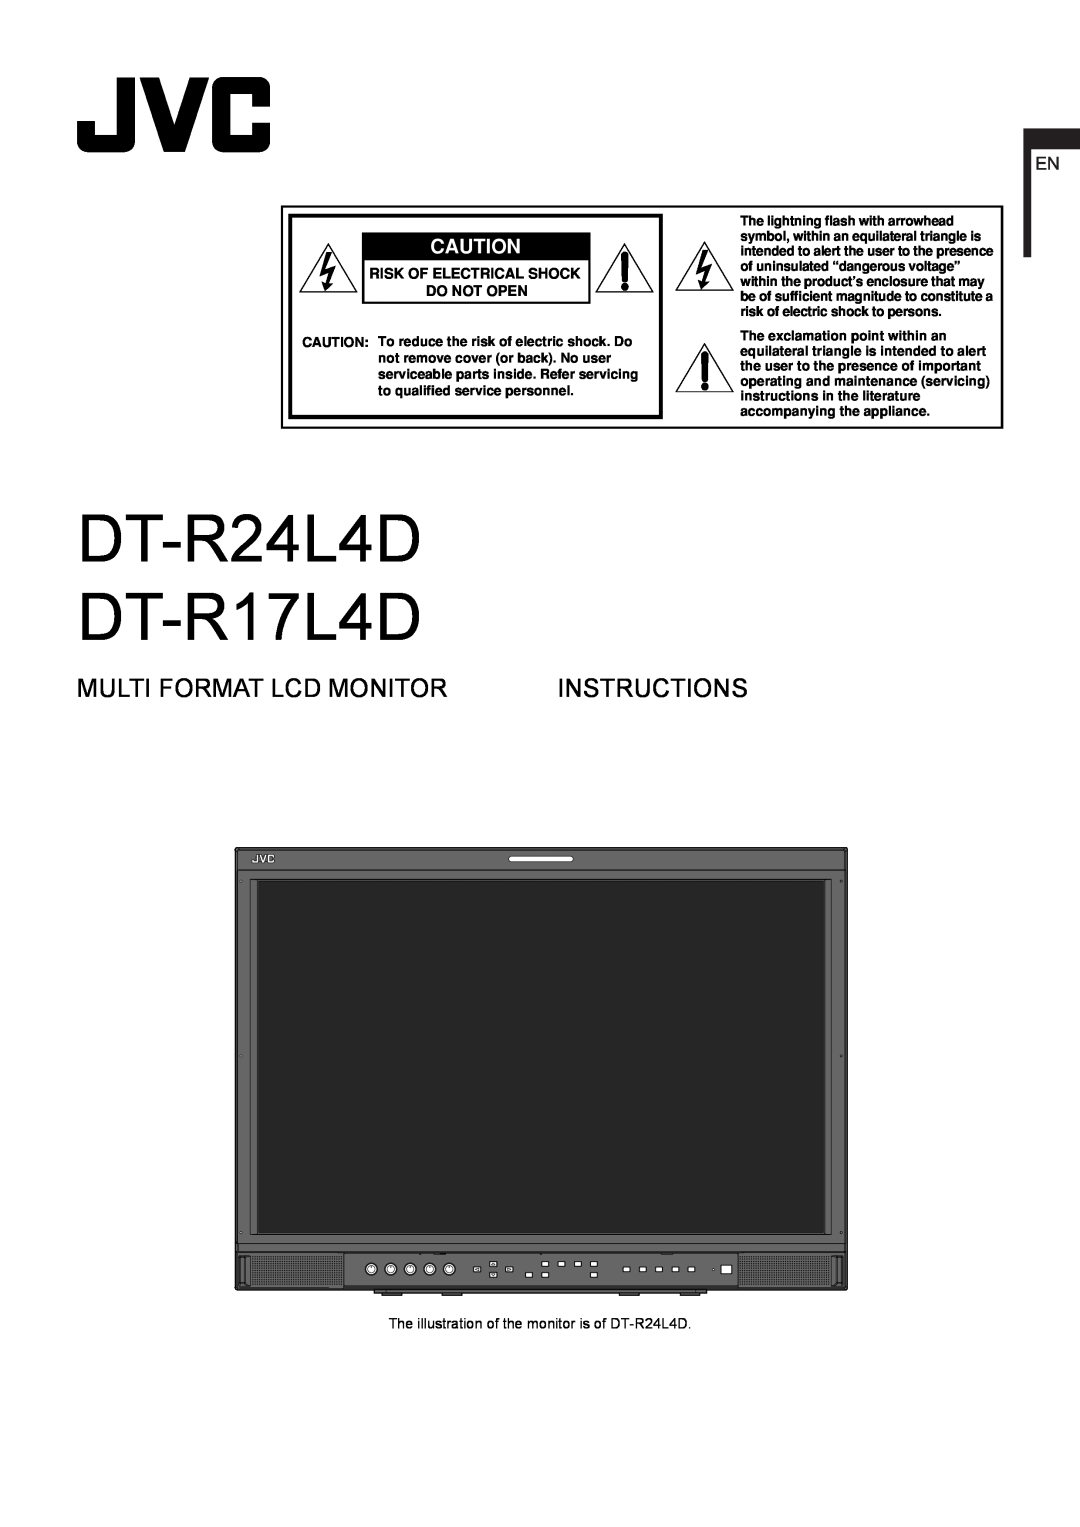 JVC user service DT-R24L4D DT-R17L4D, Multi Format Lcd Monitor, Instructions, Risk Of Electrical Shock Do Not Open 